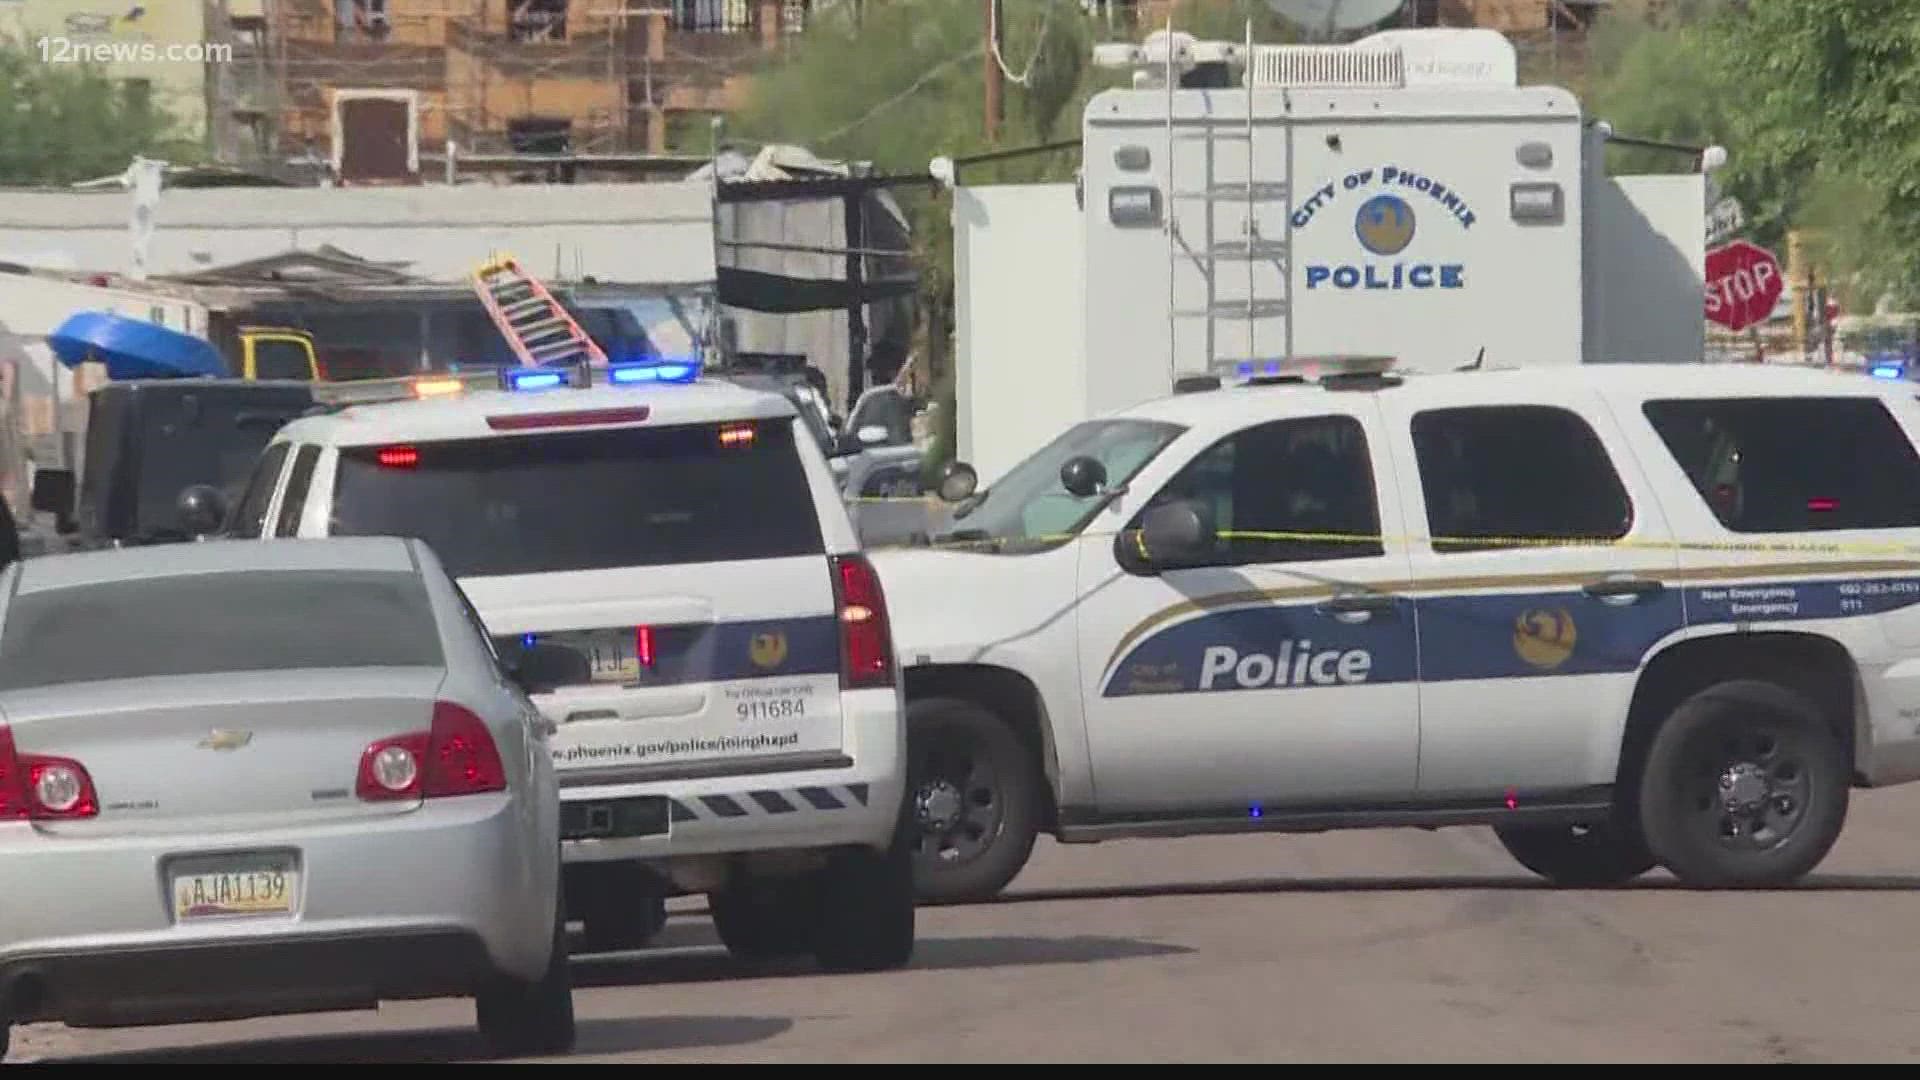 A 2-year-old girl is dead, and a 6-year-old boy is in the hospital after being shot at a home in south Phoenix.